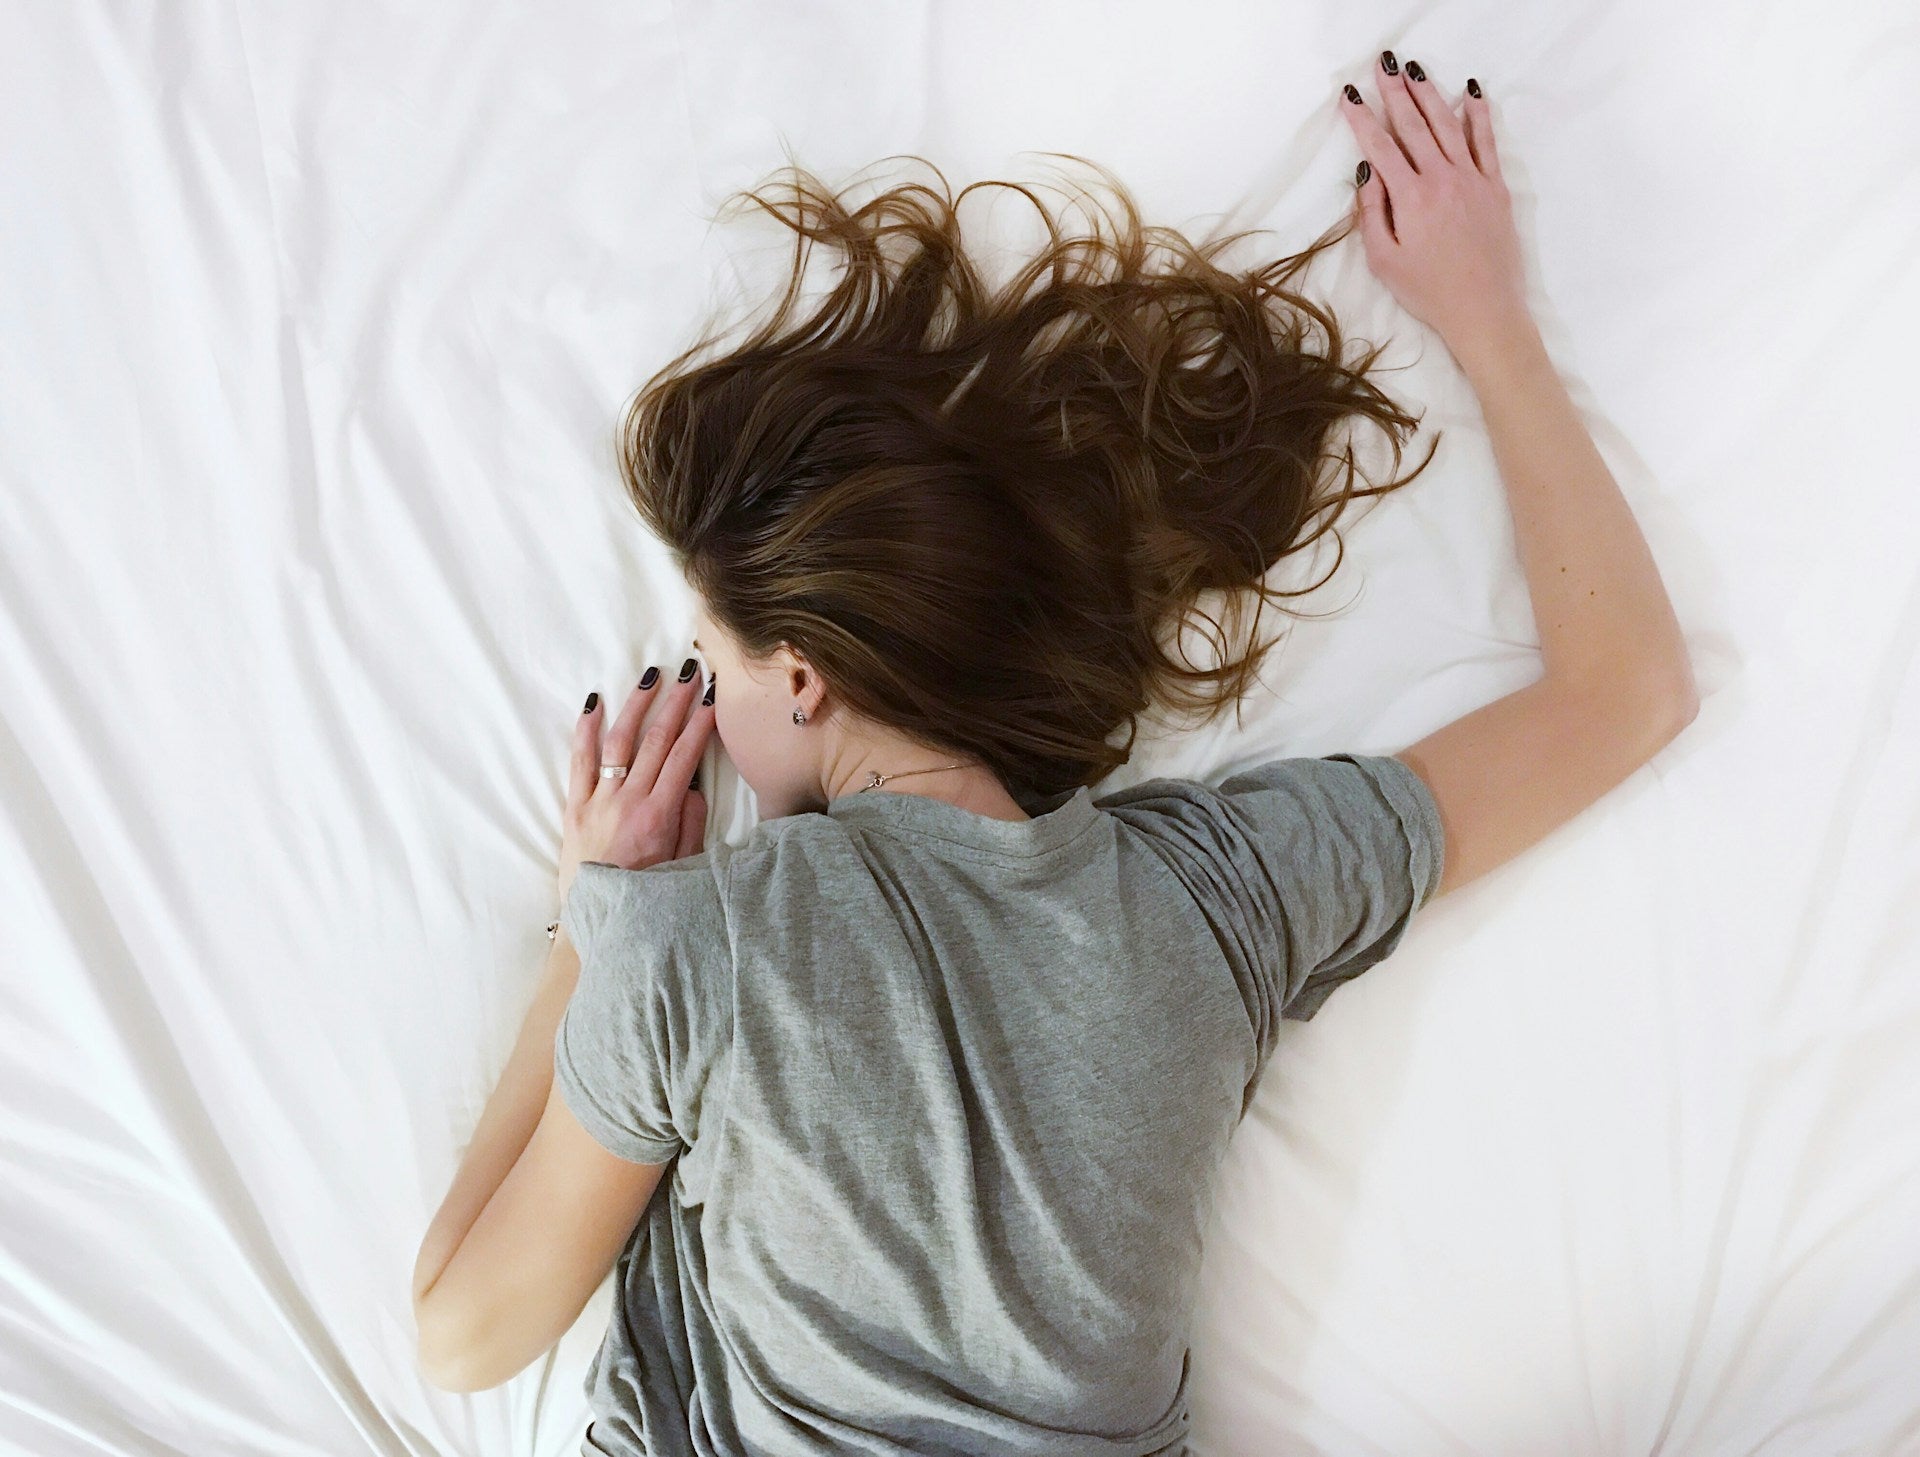 Massage for Chronic Fatigue: Can Massage Boost Your Energy Levels?